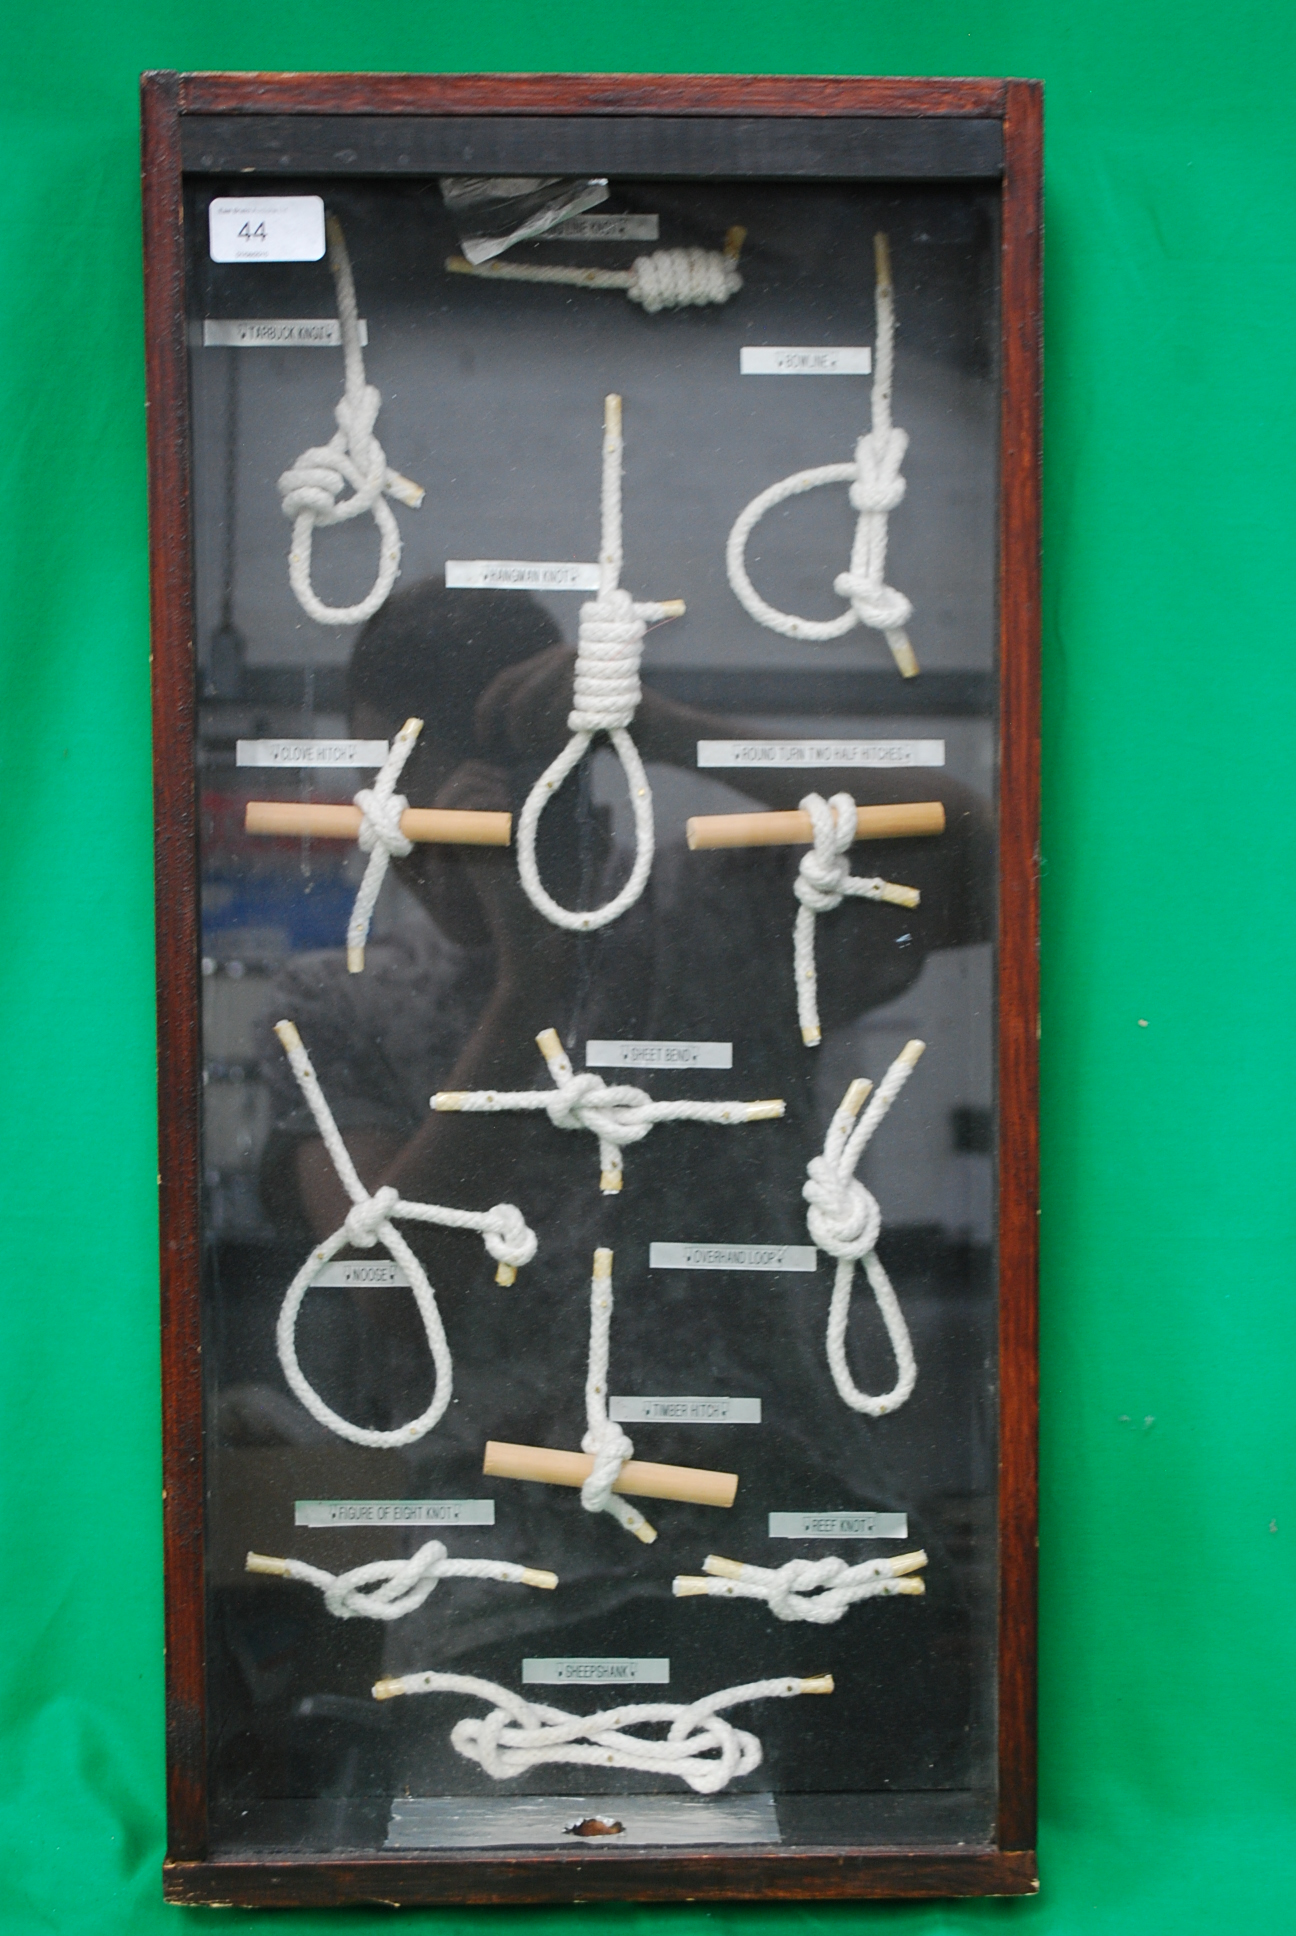 A framed display of many different knots